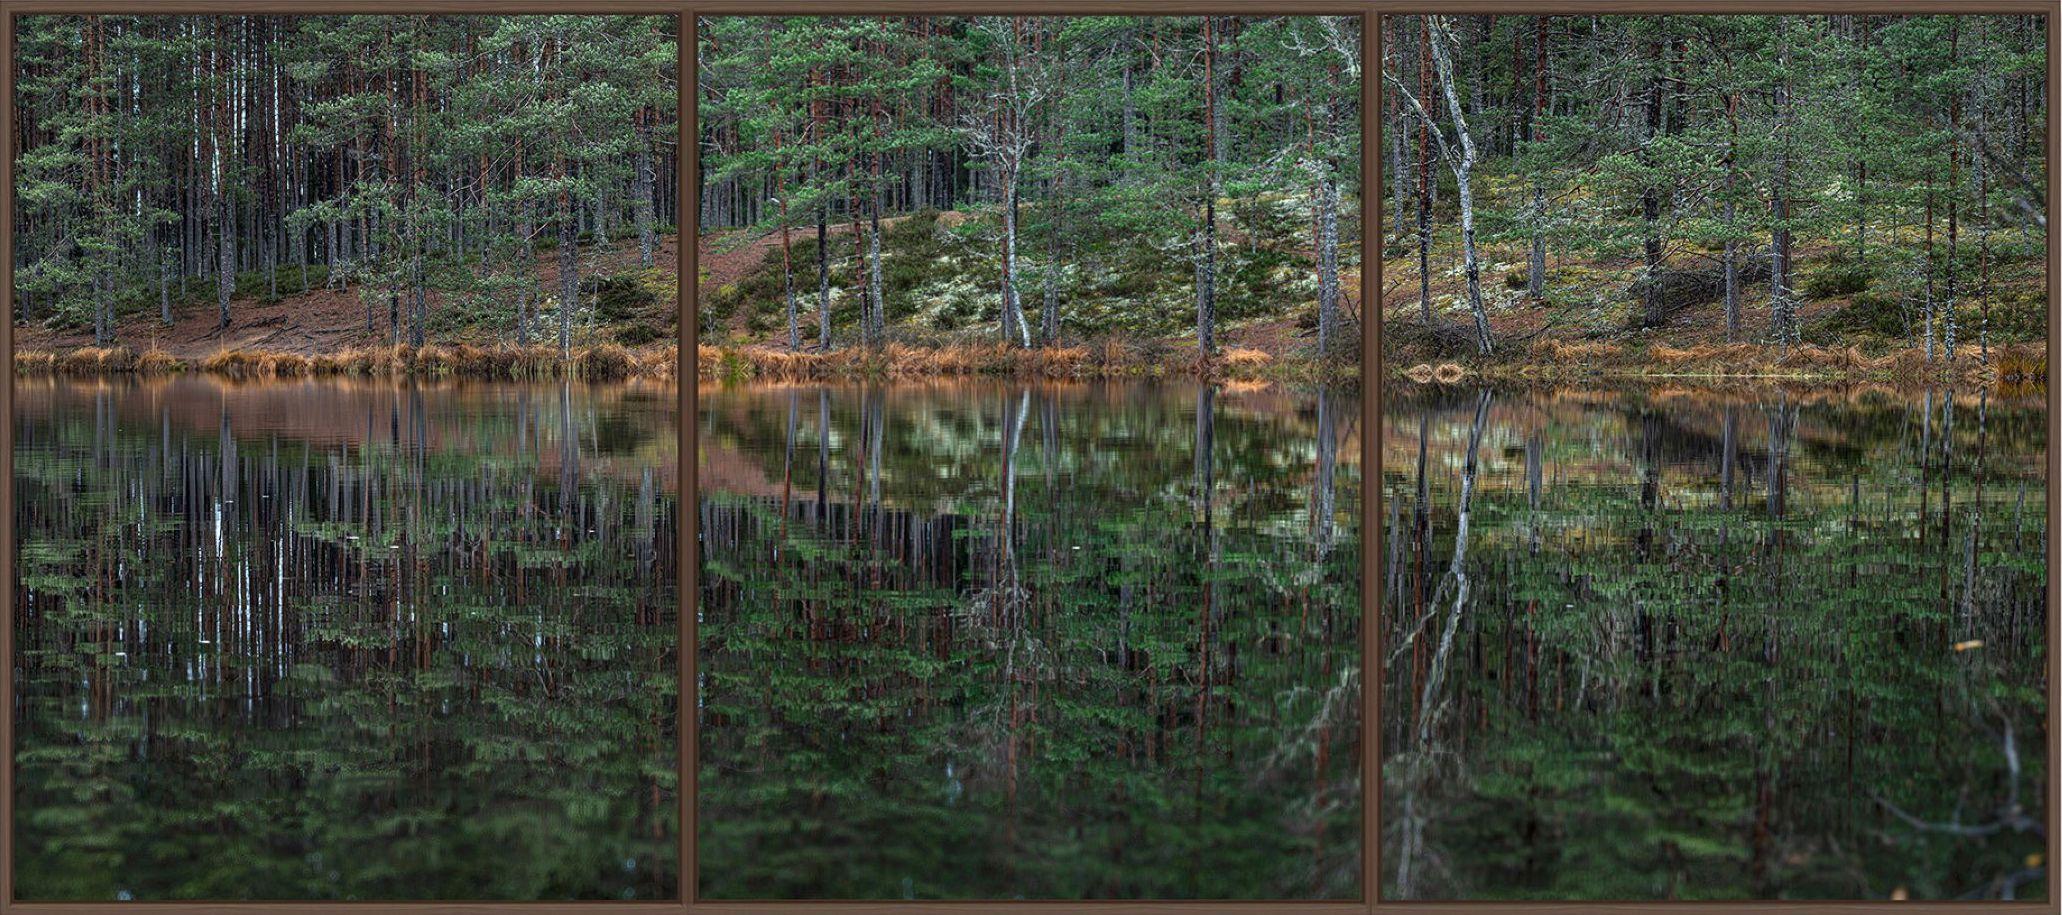 Deep Mirroring Forest 015 is a limited-edition photograph by German contemporary artist Bernhard Lang. 

This photograph is sold unframed as a print only. It is available in 5 dimensions:
*40 × 90 cm (15.7 × 35.4 in), edition of 5 copies
*60 × 135